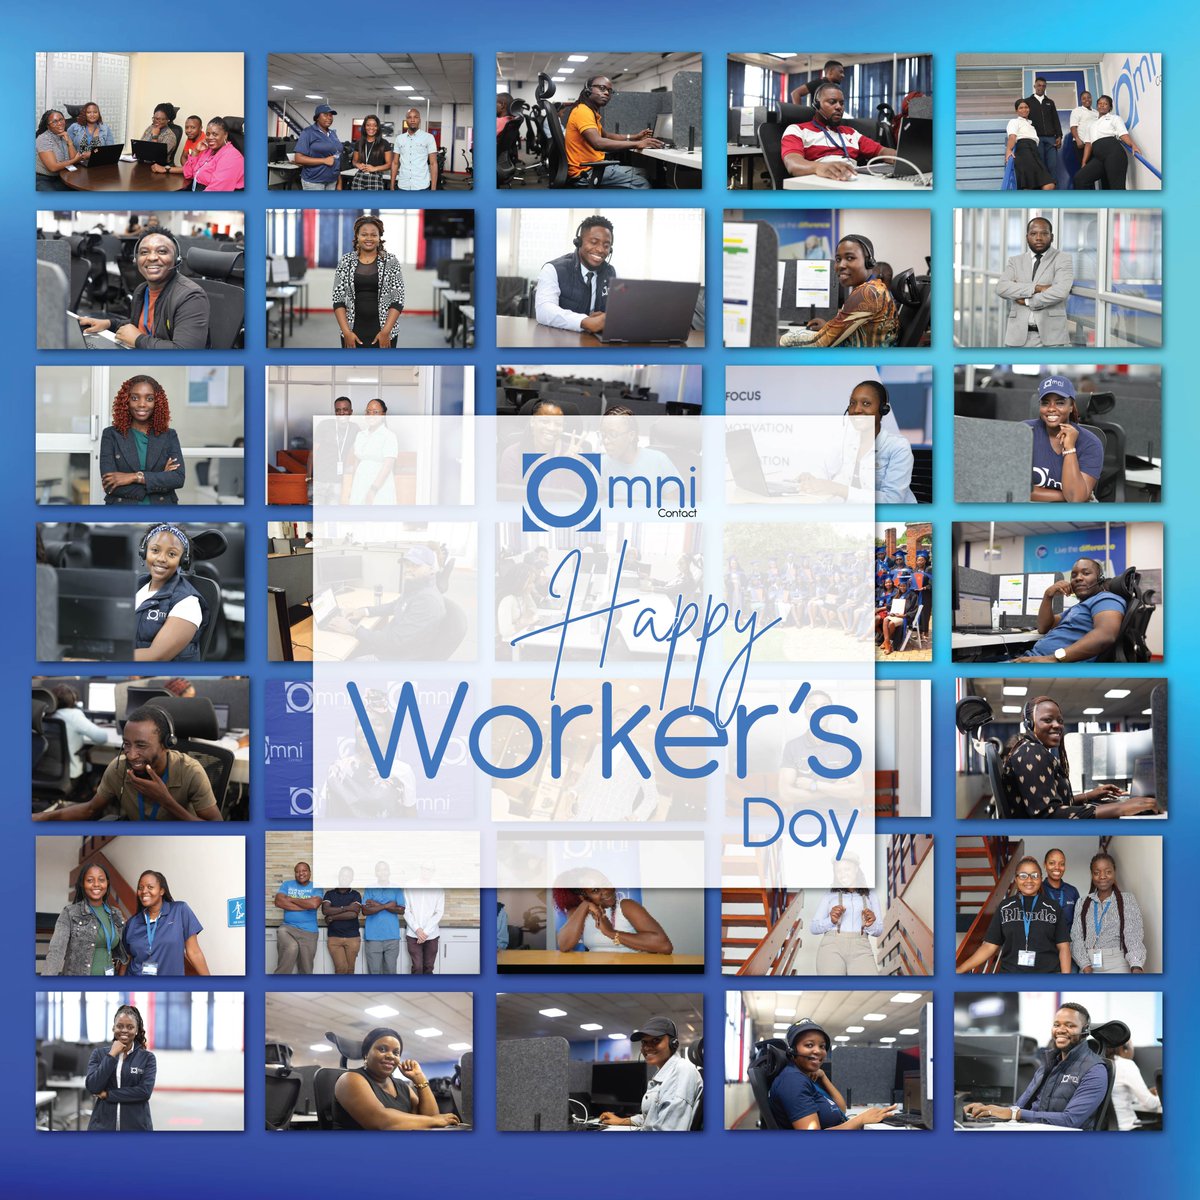 We salute our hardworking staff who contribute their time, skills and efforts towards shaping our society. May this day serve as a reminder of the importance and value of labor in every facet of our lives. Happy Worker's Day!
#OmniContact #HappyWorkersDay #1May